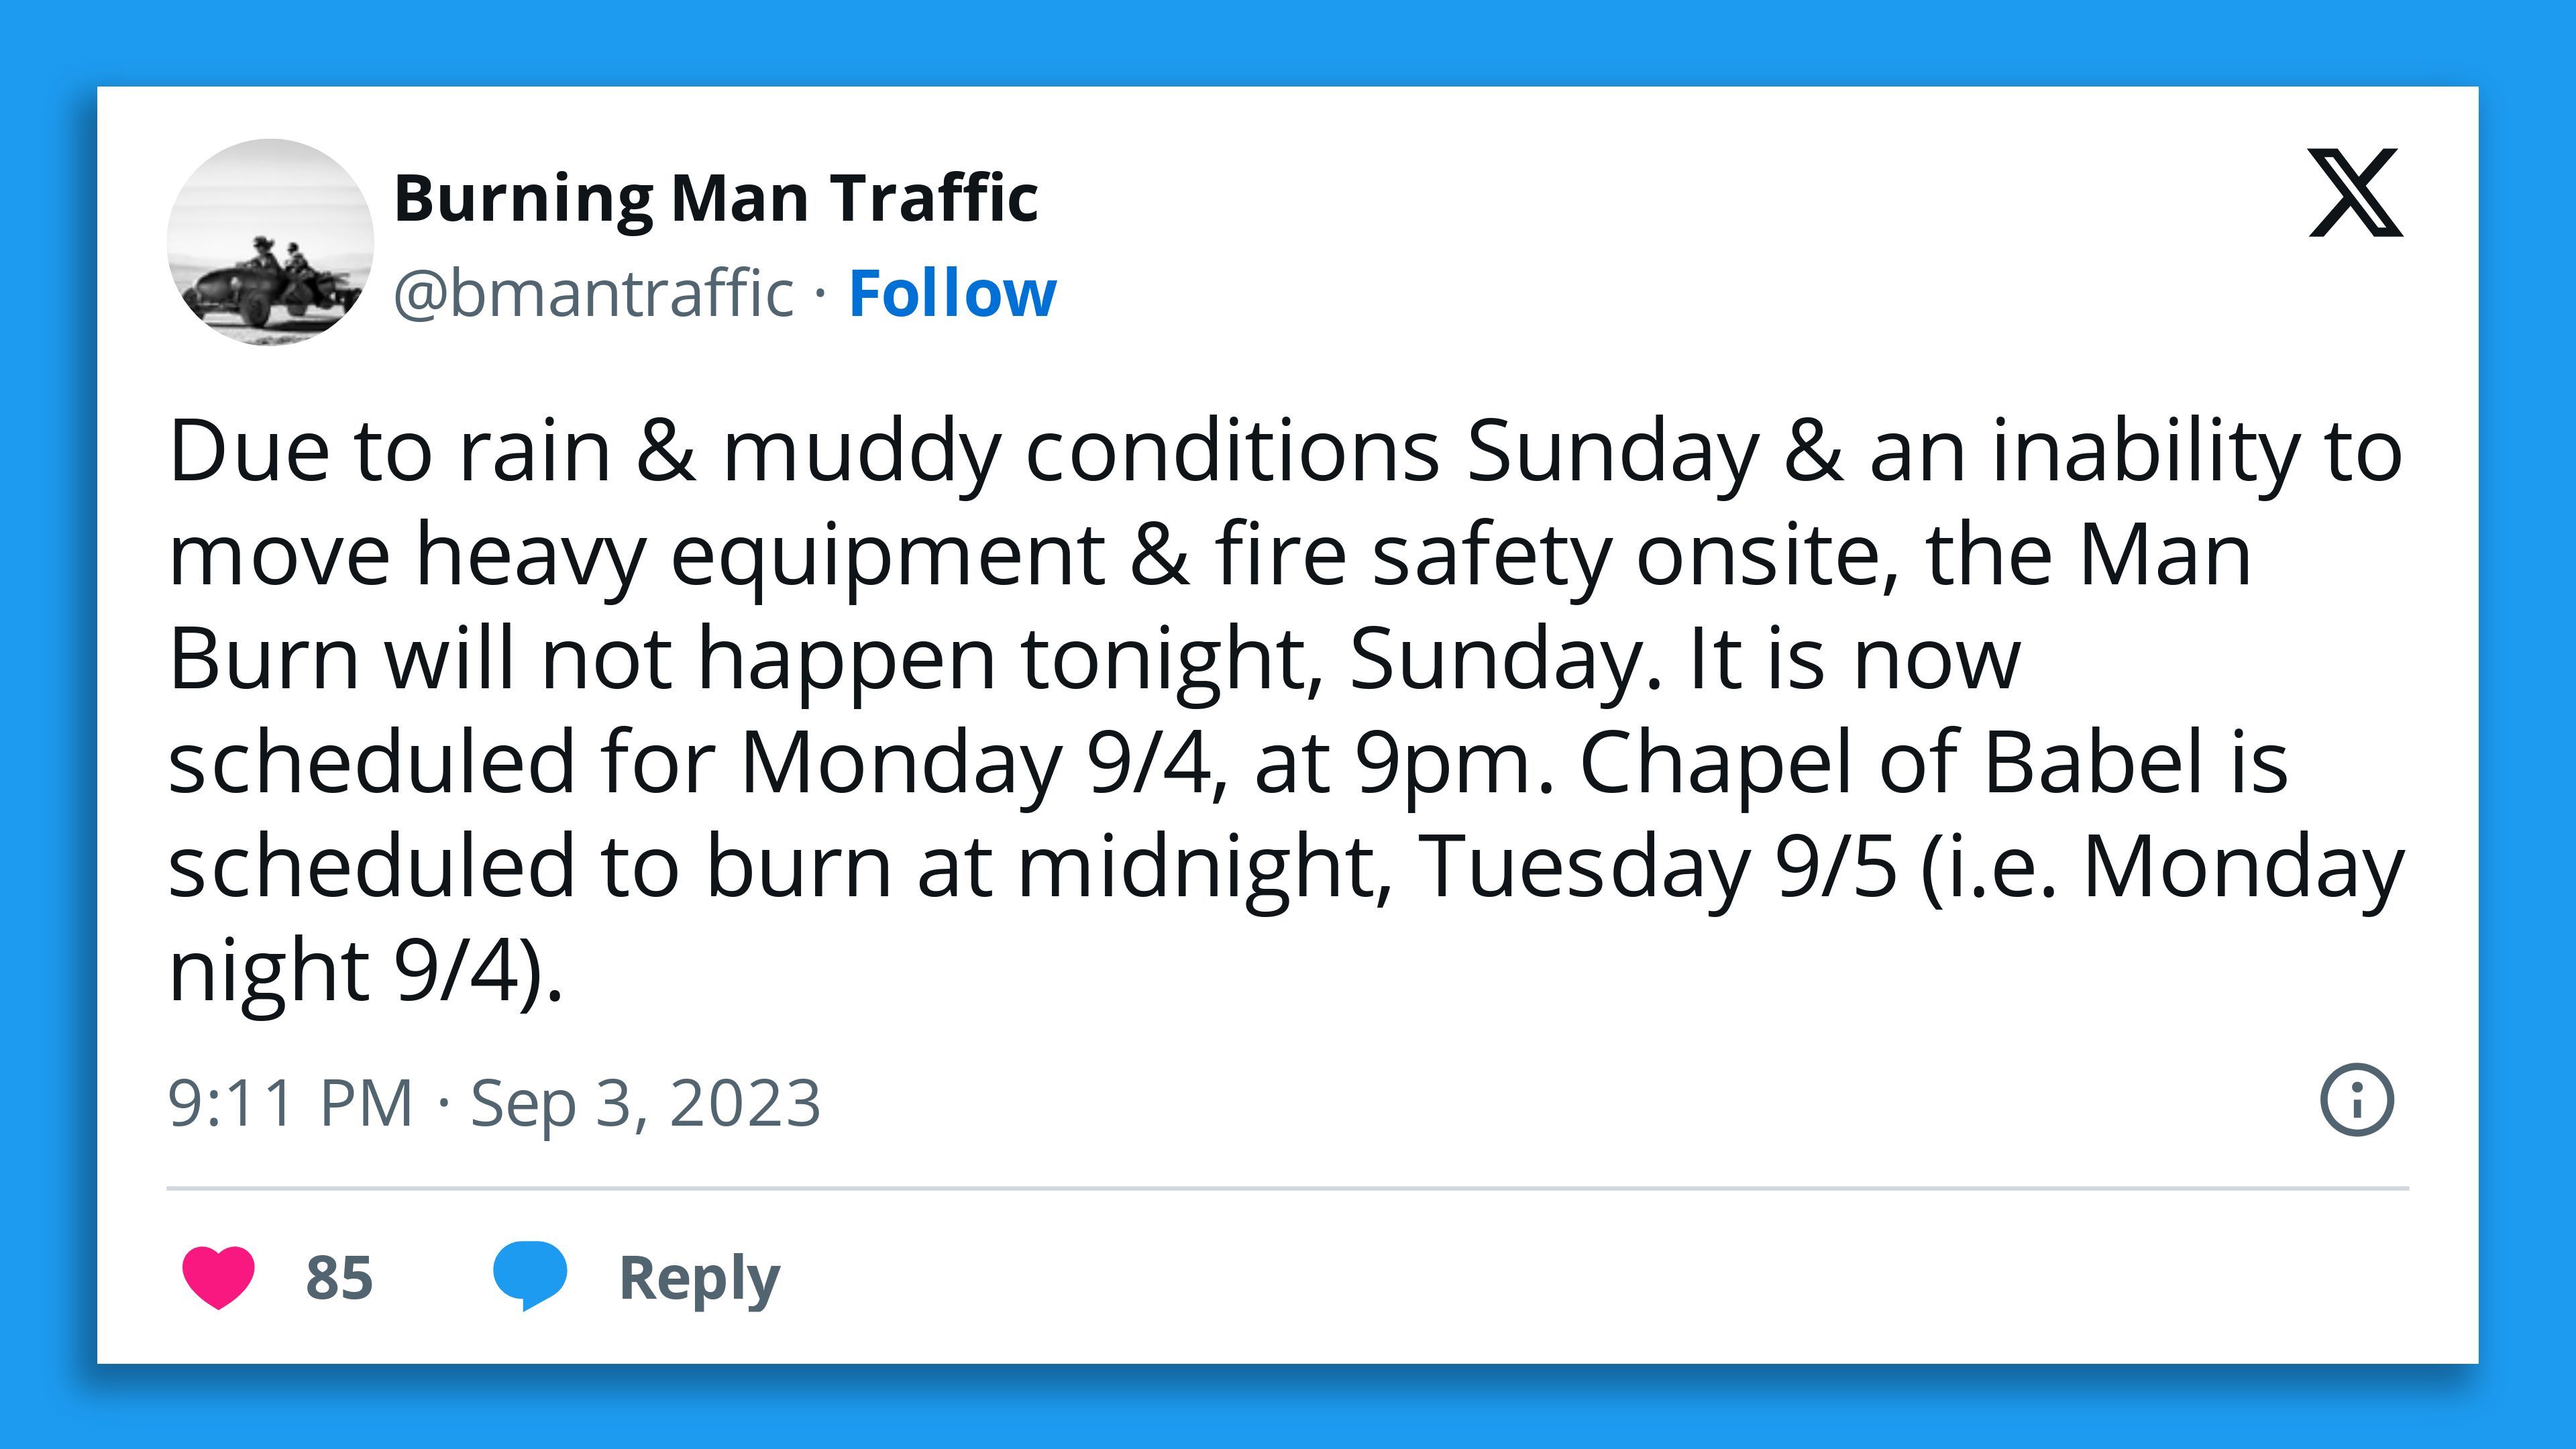 A screenshot of a tweet by Burning Man organizers saying: "Due to rain & muddy conditions Sunday & an inability to move heavy equipment & fire safety onsite, the Man Burn will not happen tonight, Sunday. It is now scheduled for Monday 9/4, at 9pm. Chapel of Babel is scheduled to burn at midnight, Tuesday 9/5 (i.e. Monday night 9/4)."